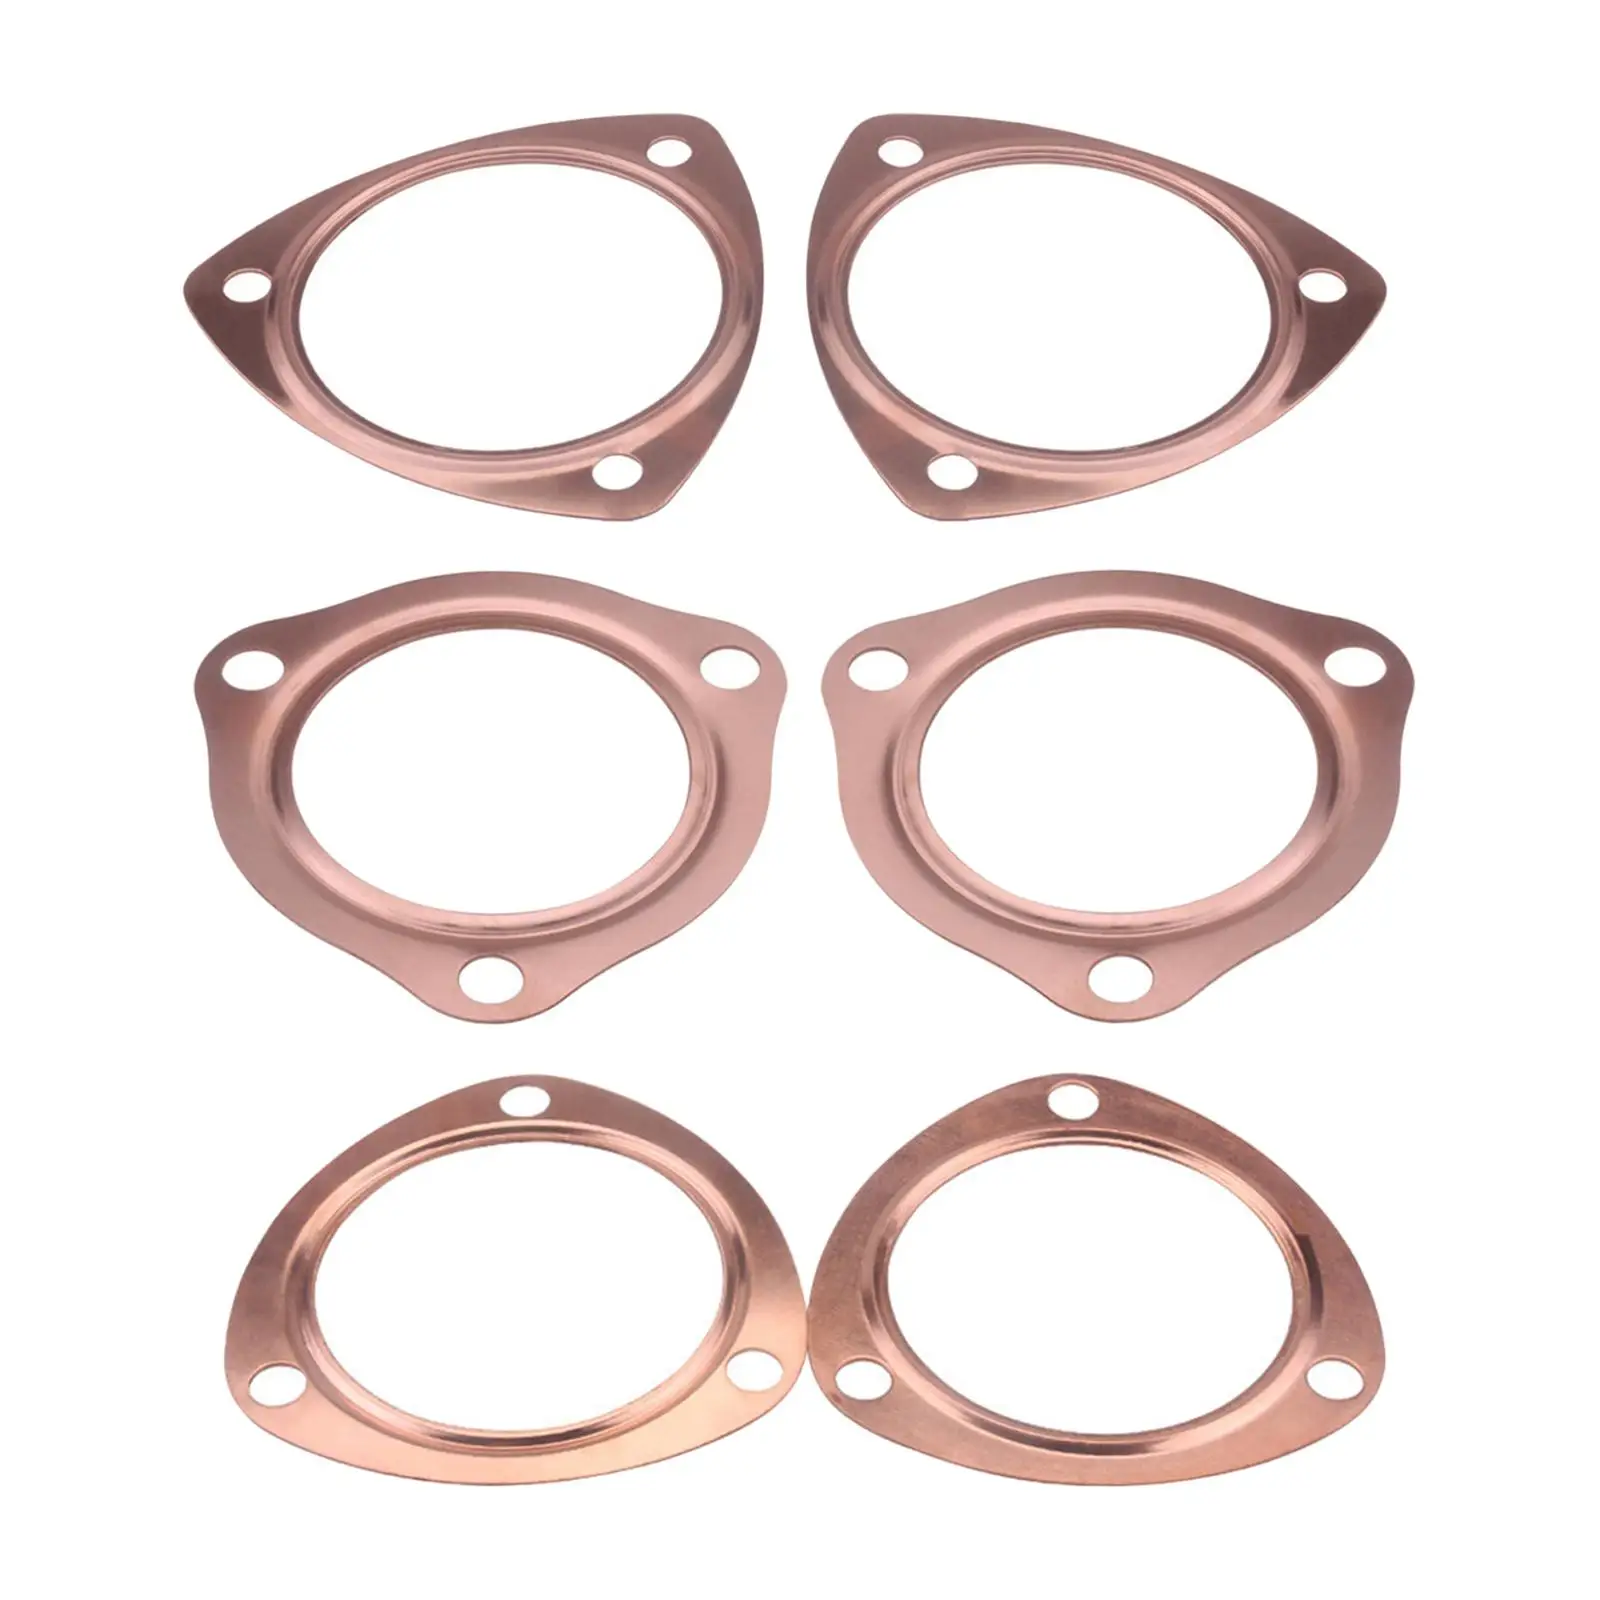 Copper Collector Gasket Copper Header Exhaust Collector Gaskets for Sbc Bbc 302 350 454